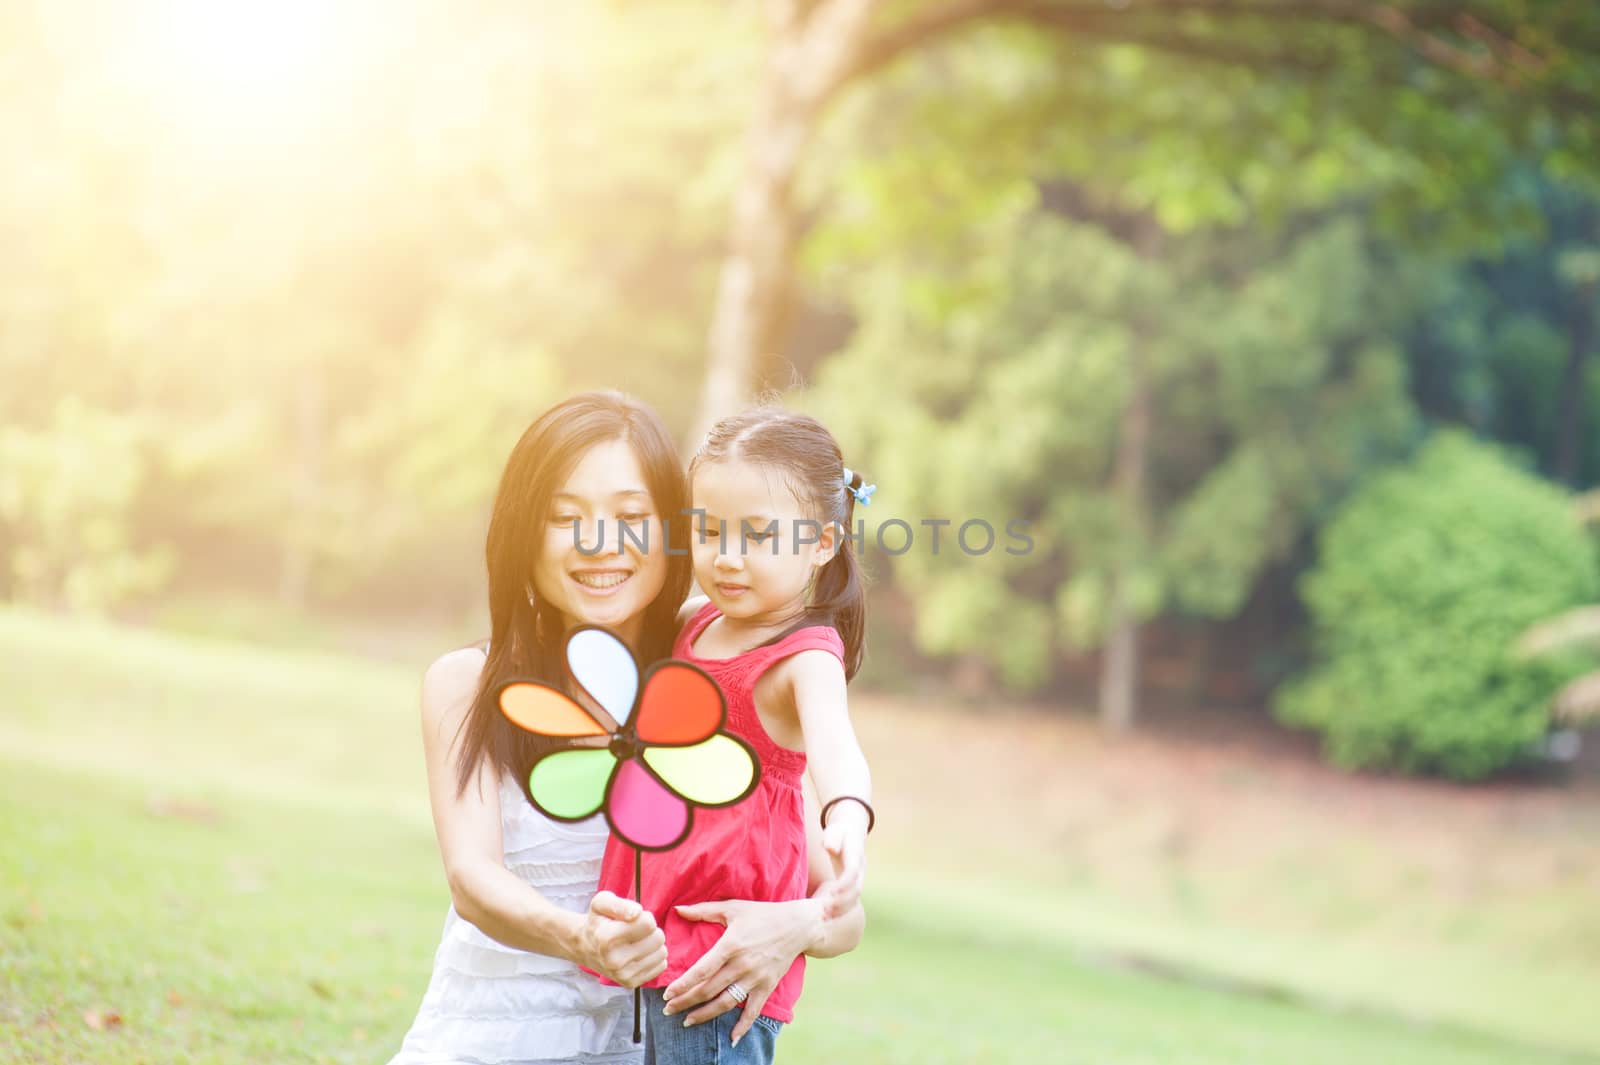 Love between mother and daughter. Asian family outdoor fun, morning with sun flare.